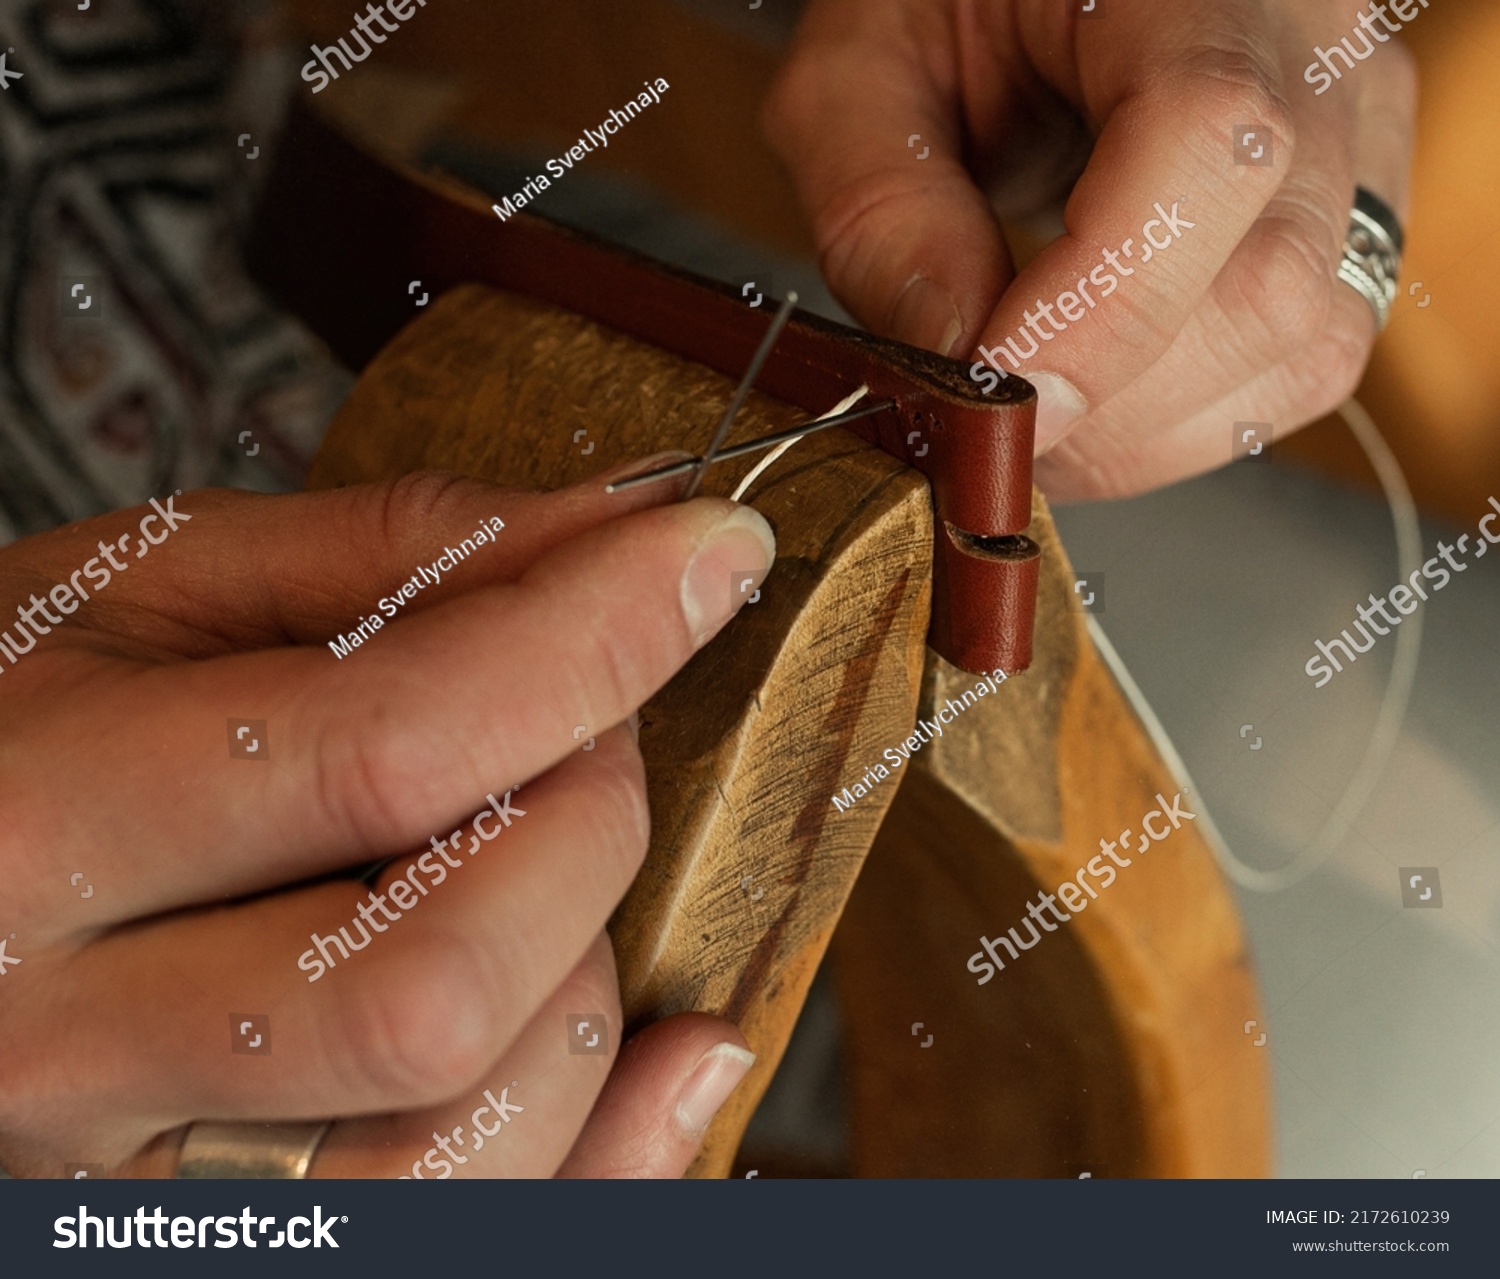 Handmade. the girl sews a leather belt in the workshop. Wooden machine. Atmospheric photo. Close up #2172610239